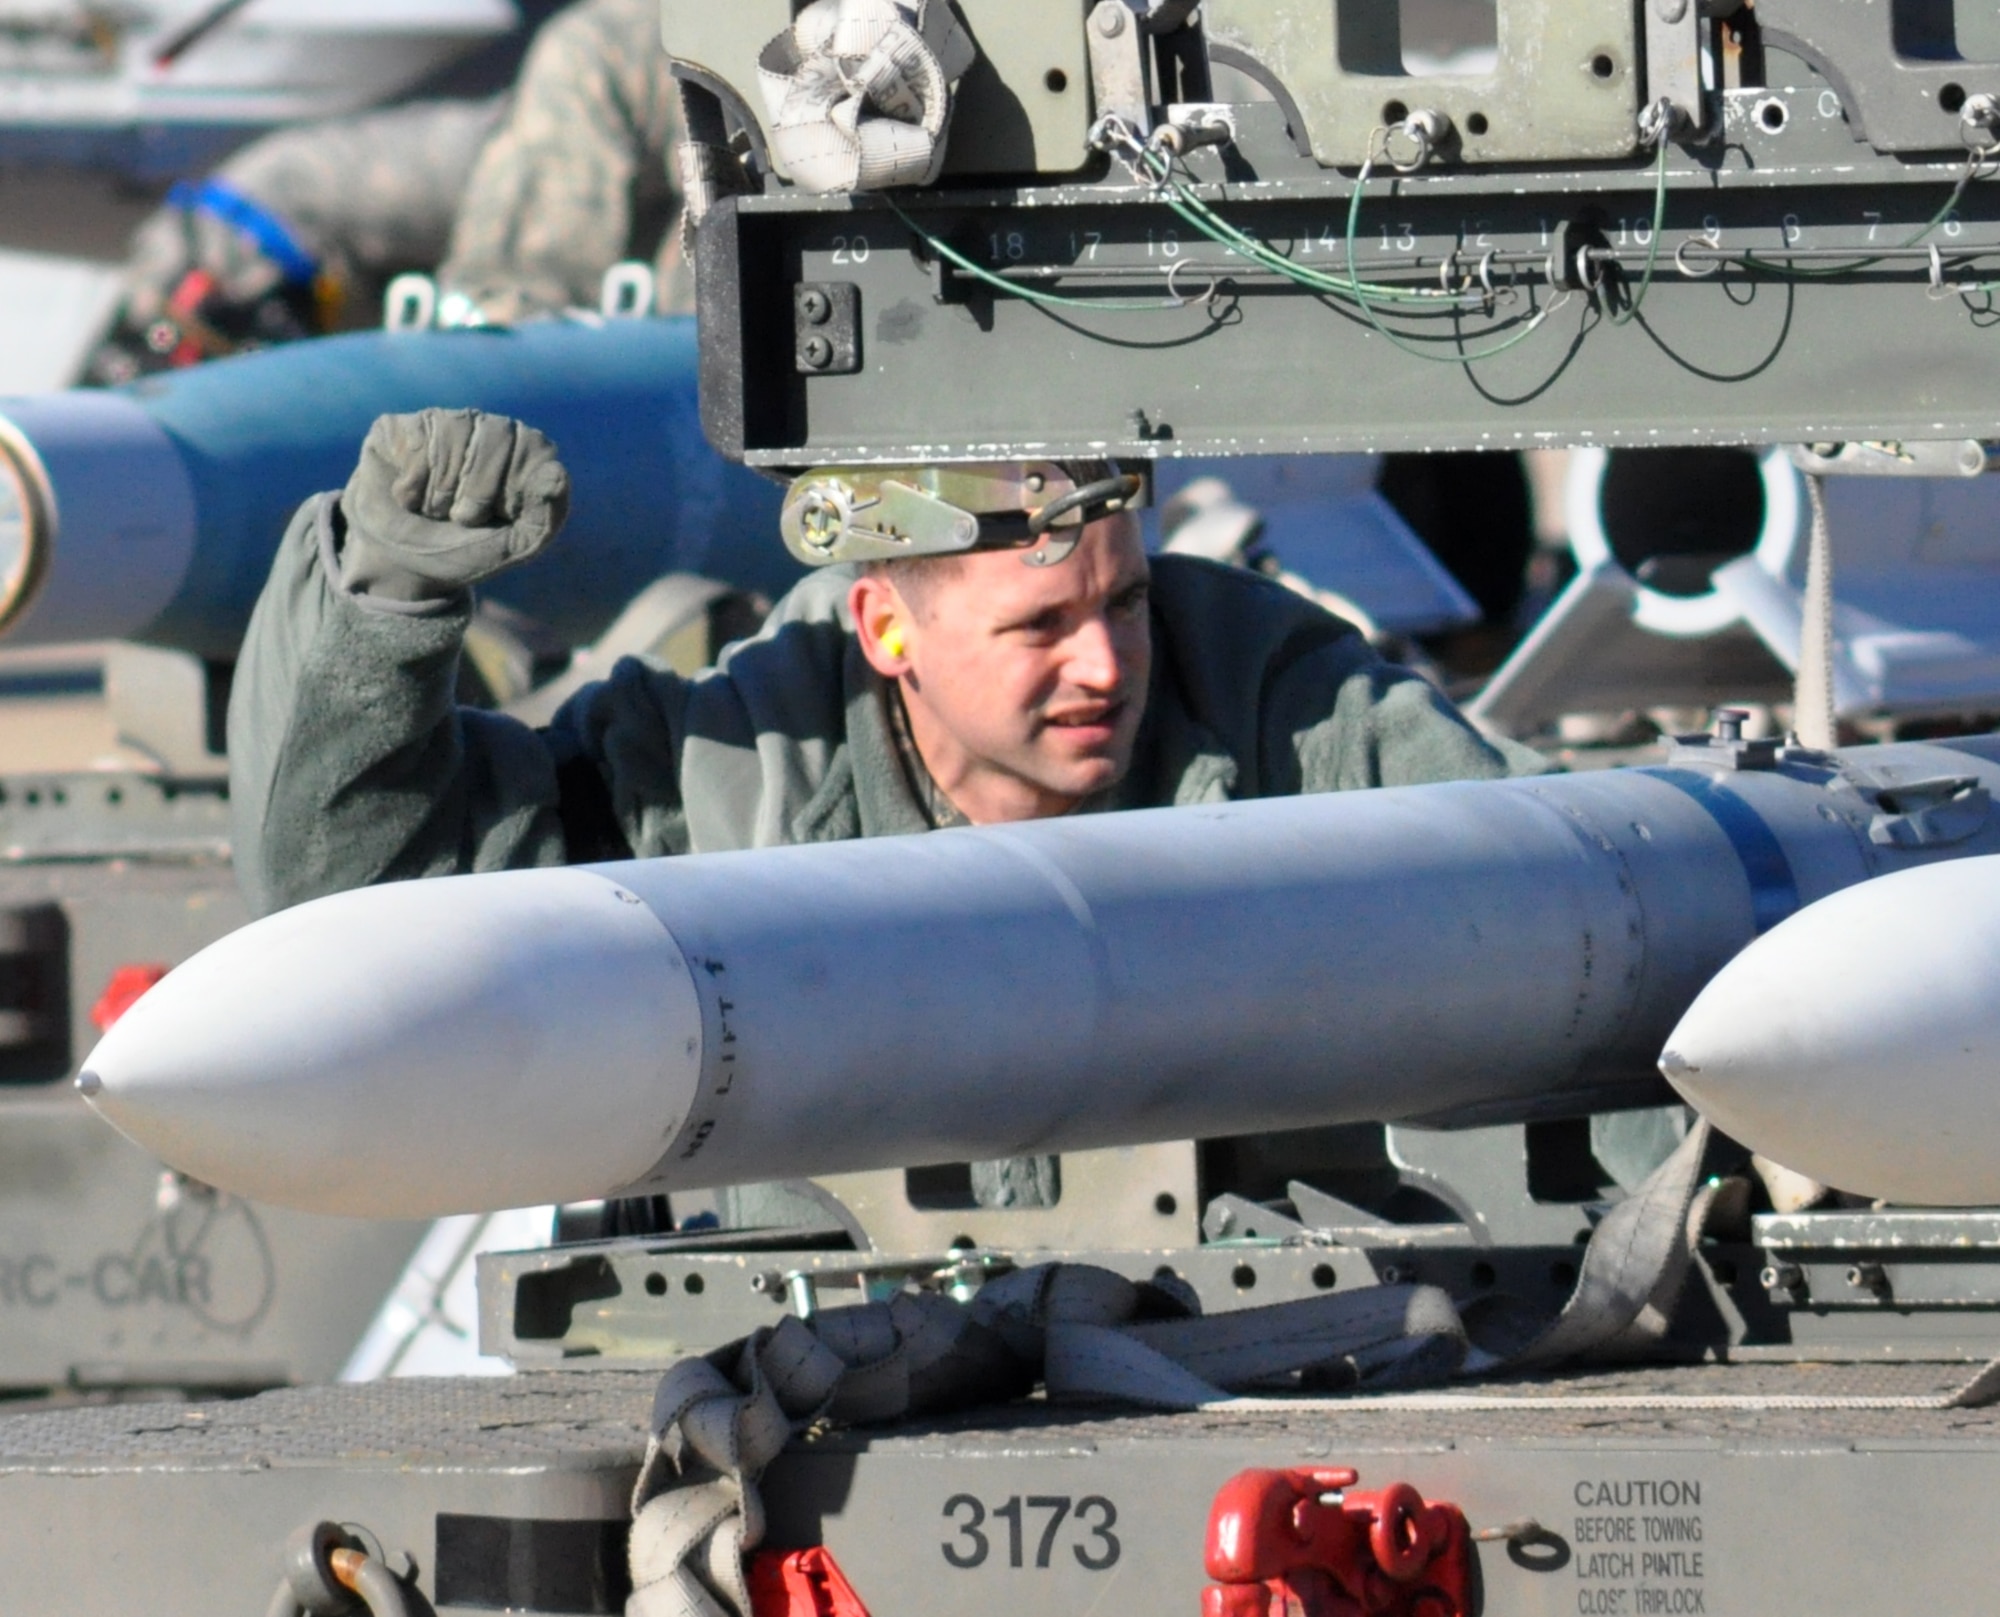 Staff Sgt. Matthew Raesly, 301st Aircraft Maintenance Squadron load team chief and Air Force Reservist, signals the driver of a weapons loader to hold his position while preparing to secure and lift an AIM-120 missile for upload on a 301st Fighter Wing's F-16 during a recent weapons load competition at the Naval Air Station Fort Worth Joint Reserve Station, Texas. (U.S. Air Force photo/Tech. Sgt. Chris Bolen)